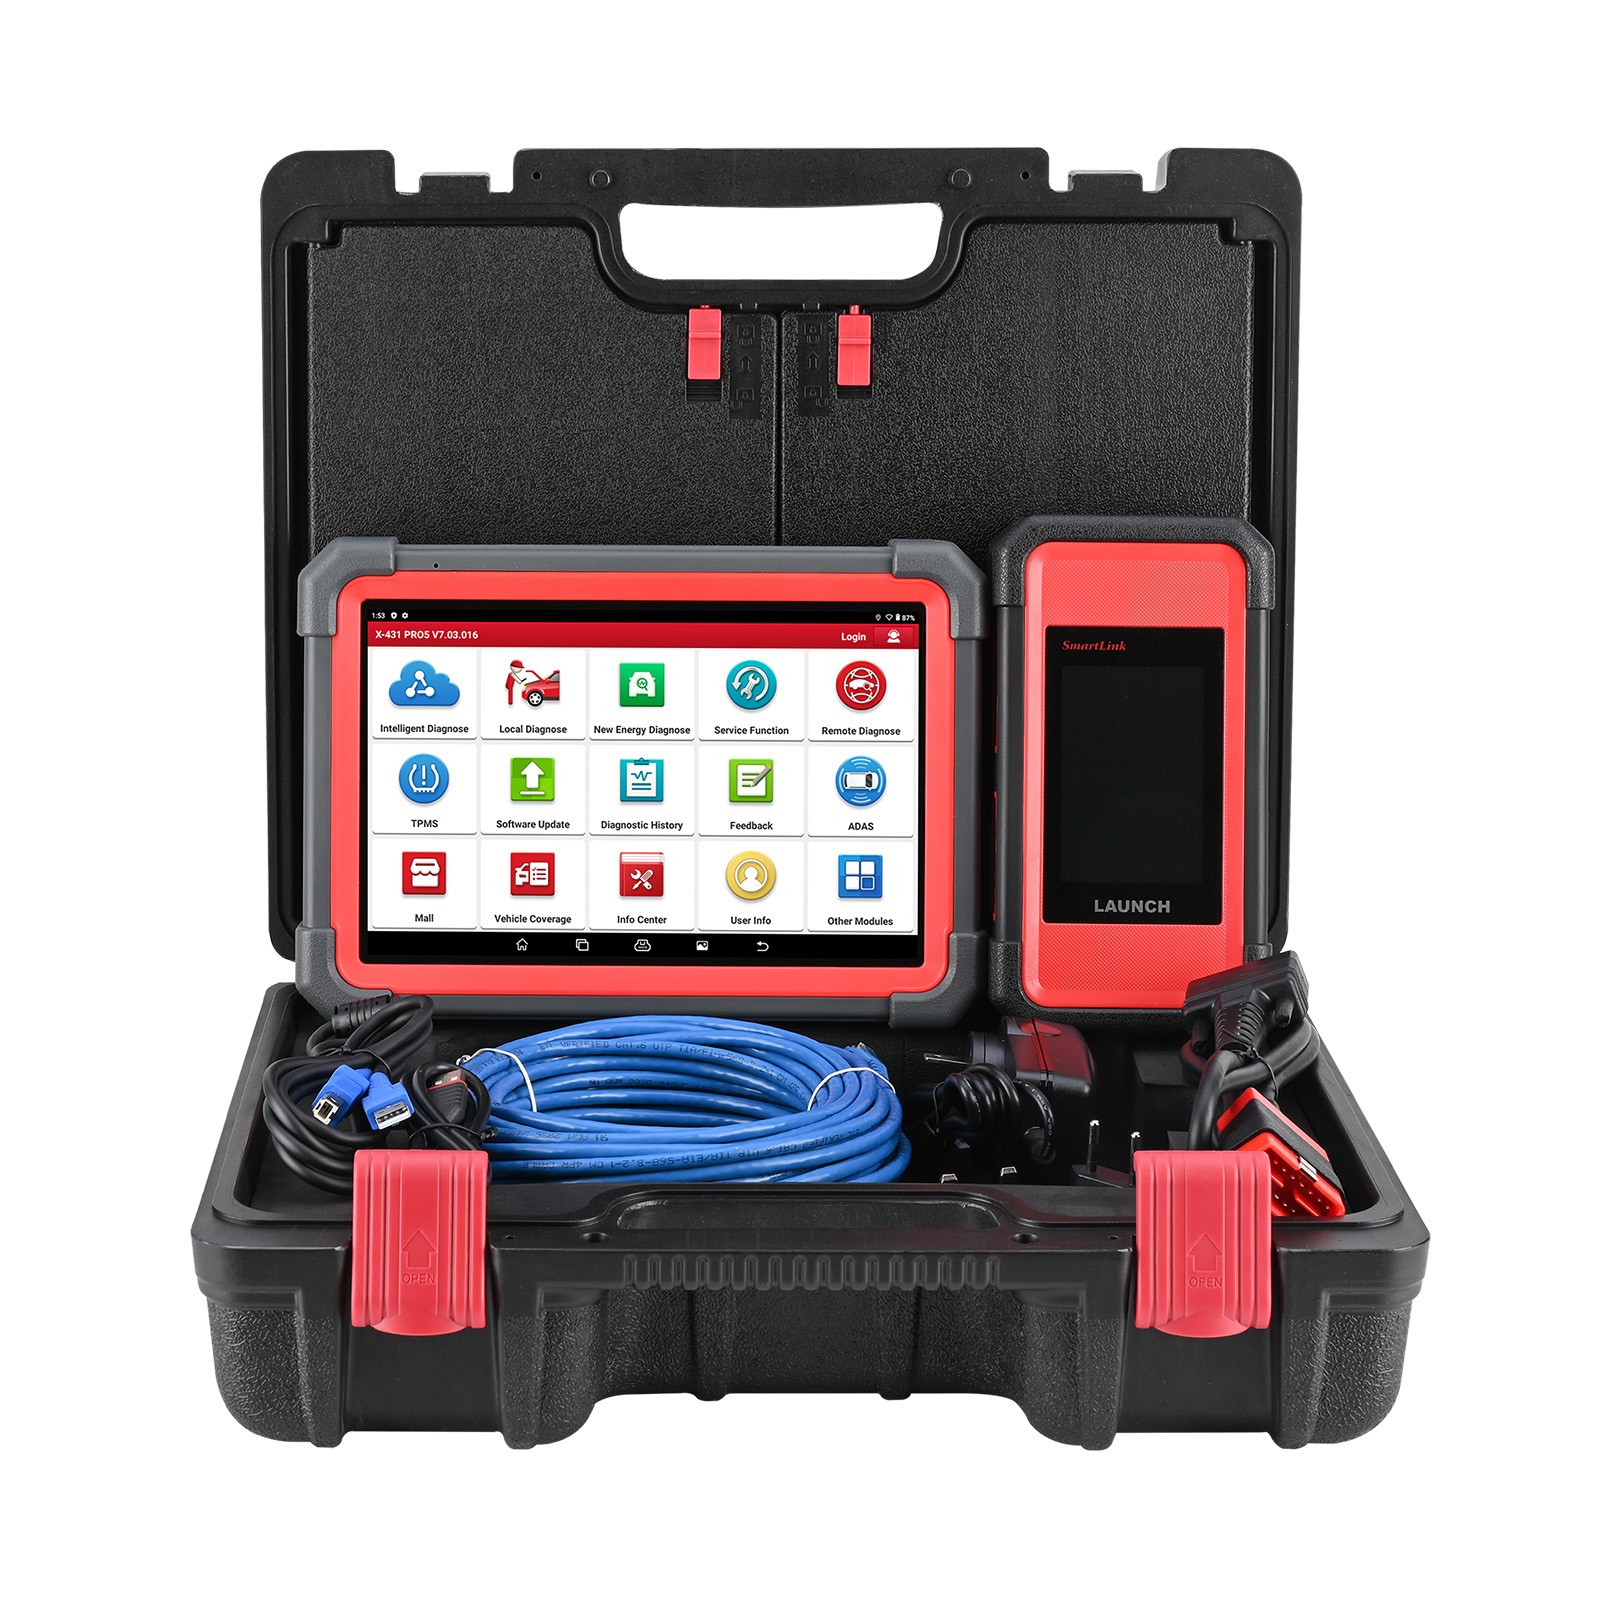 Launch-X431-PRO-5-PRO5-Full-System-Diagnostic-Tool-with-Smartlink-20-Support-J2534-CANFD-DoIP-Upgrade-Version-of-X431-Pro3-XN-SP402